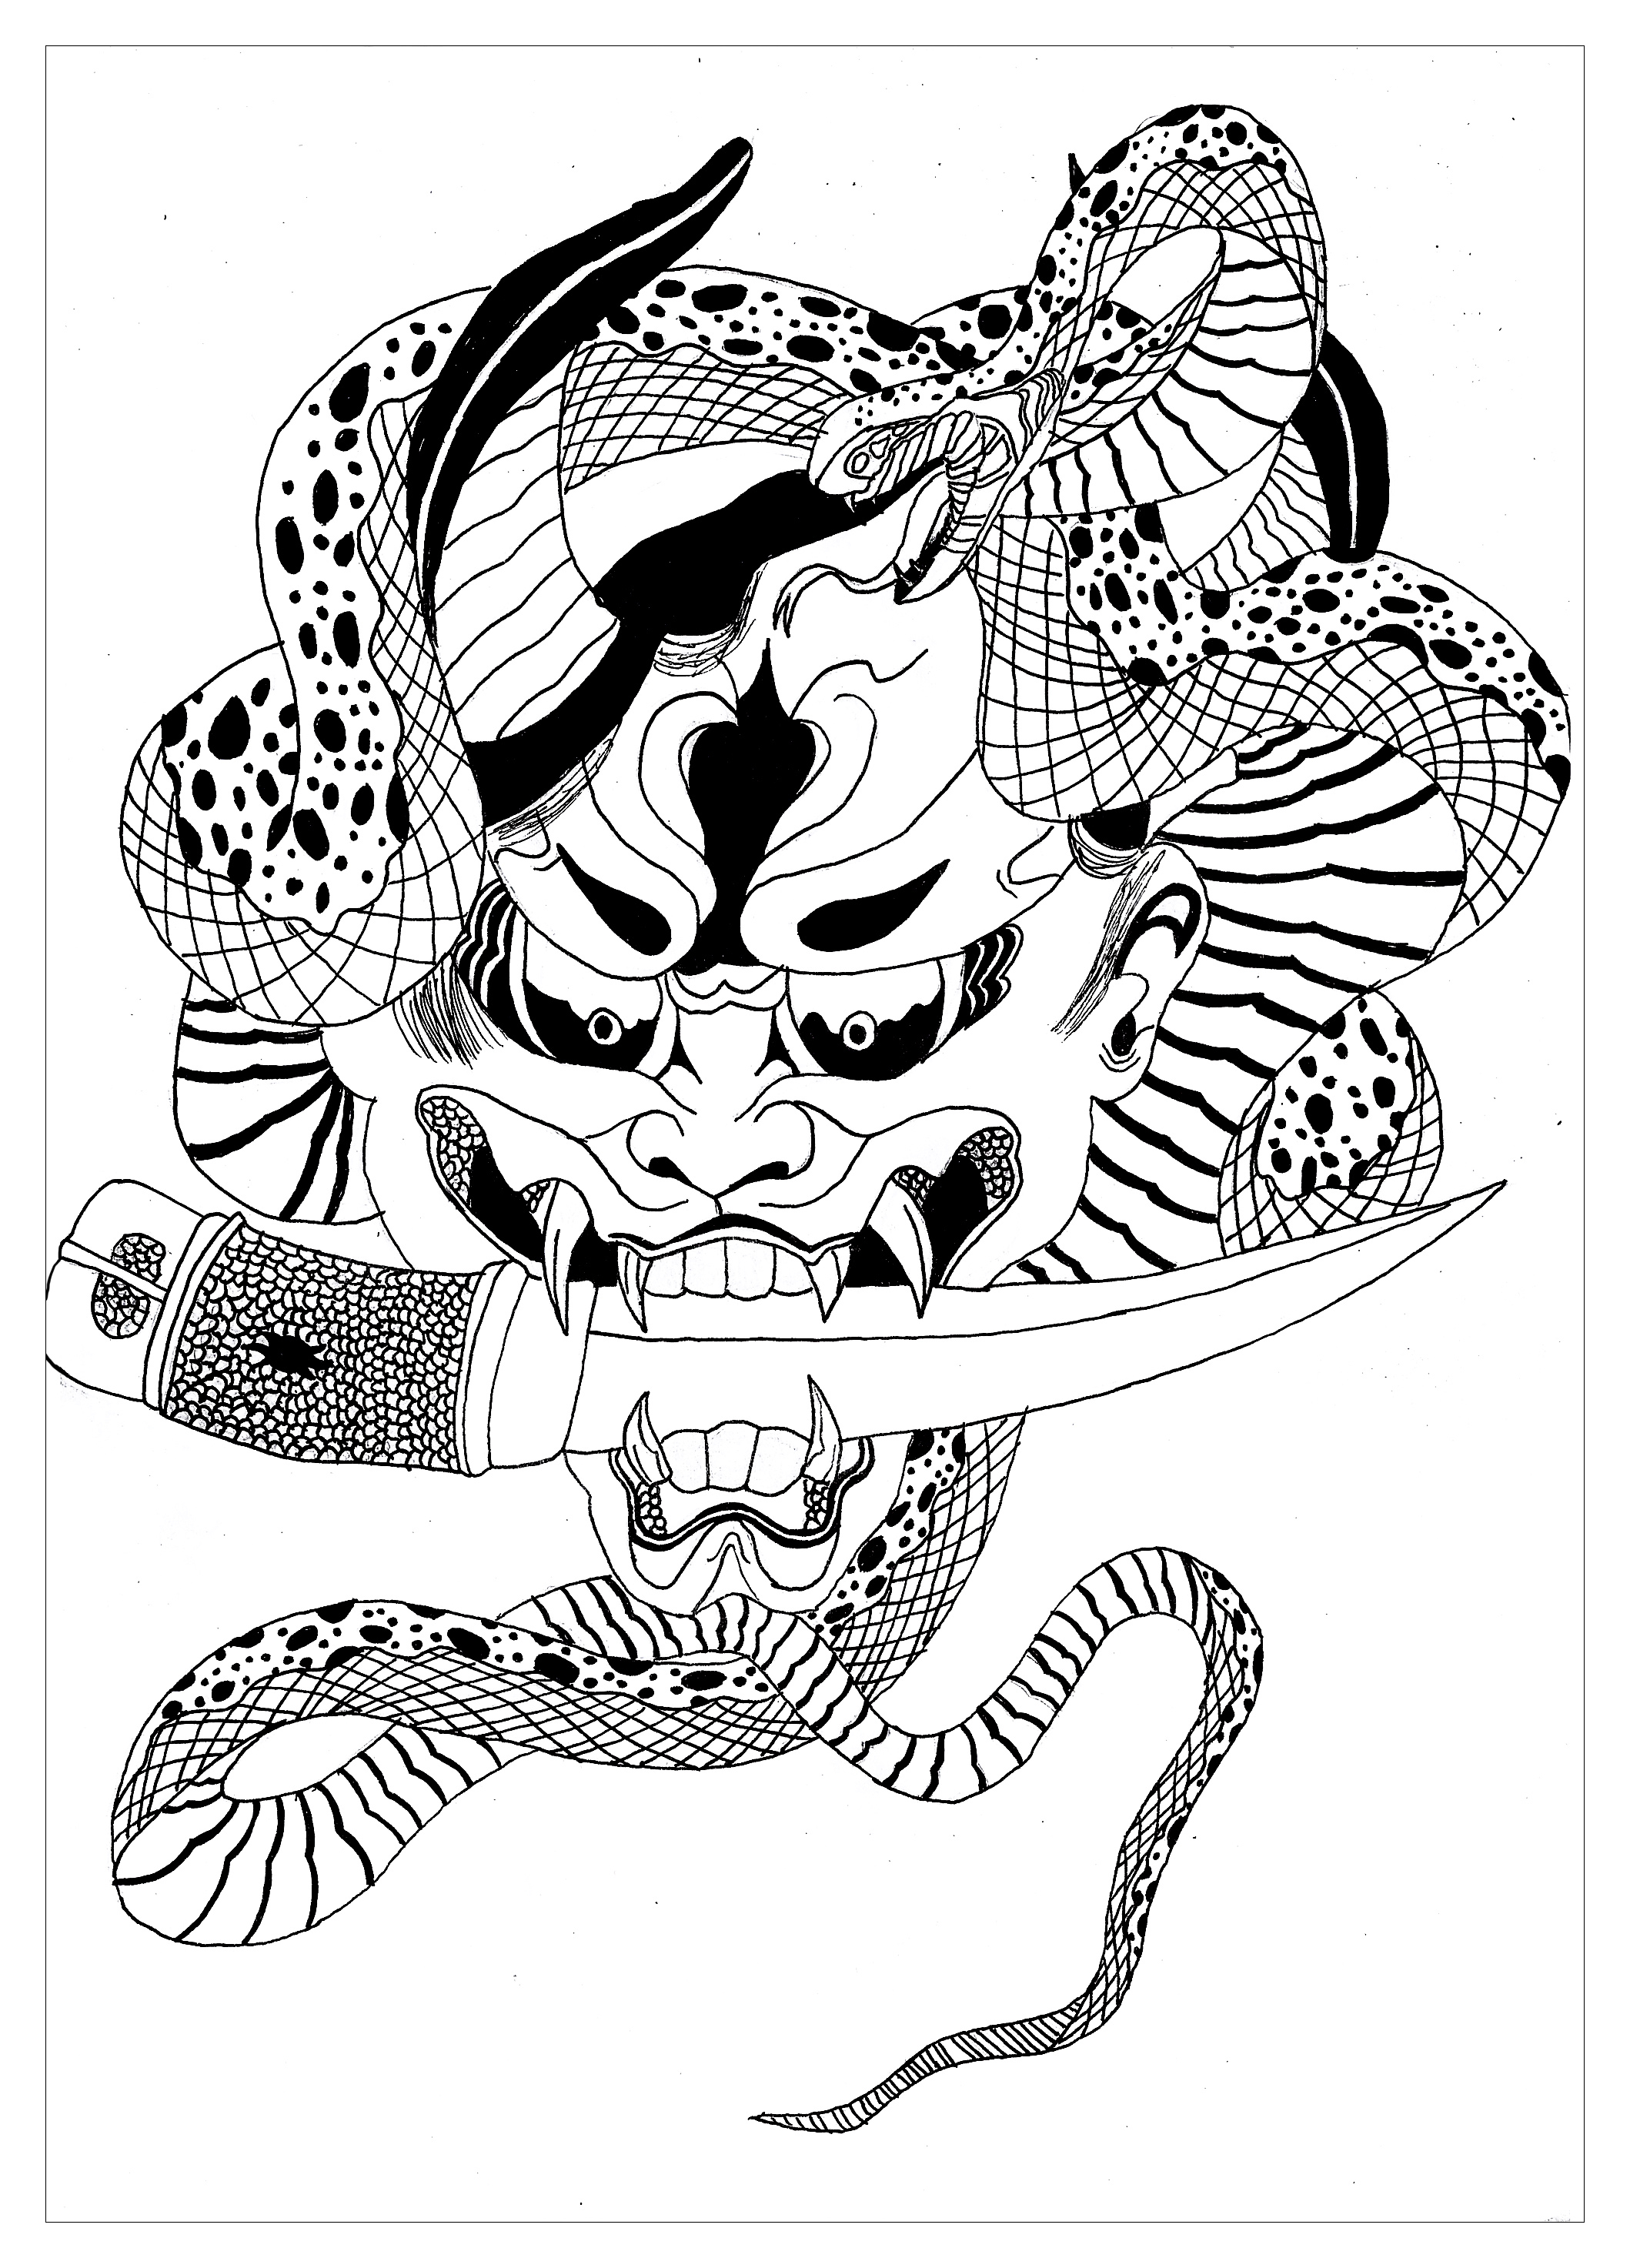 All the Adult printable coloring pages to print and color of the same theme...